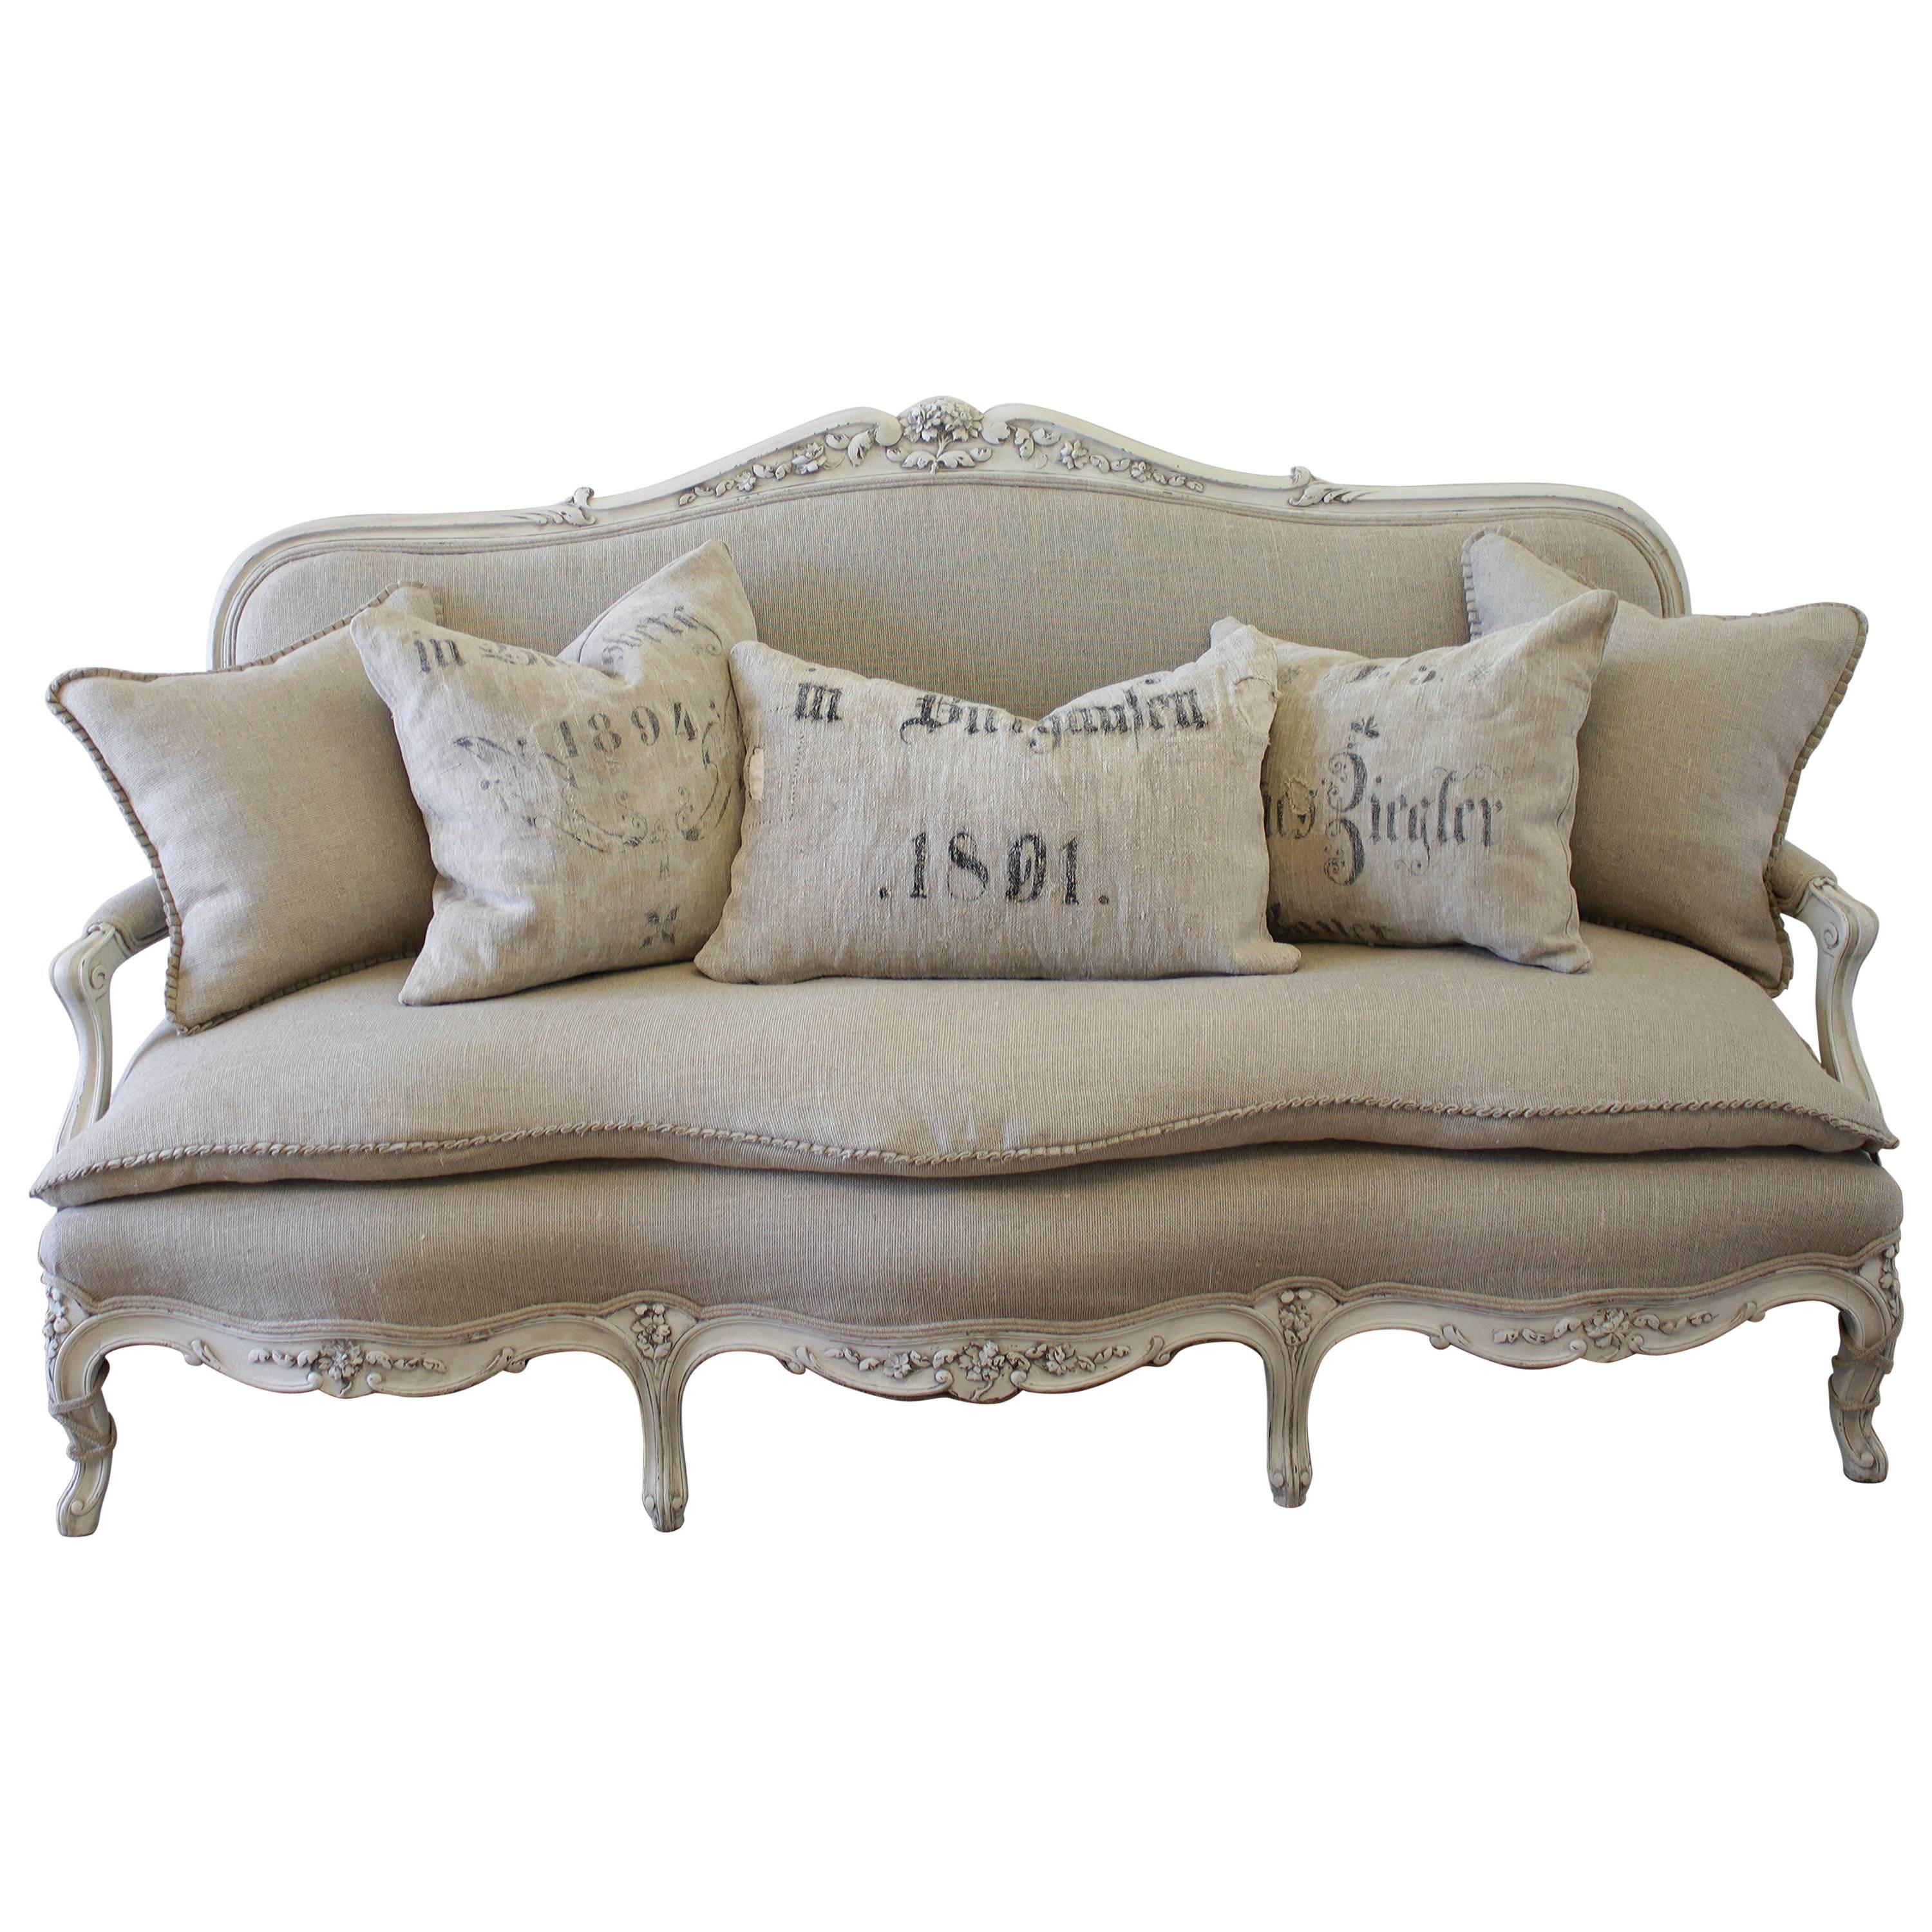 Antique Painted French Country Louis XV Style Sofa Settee in Irish Linen